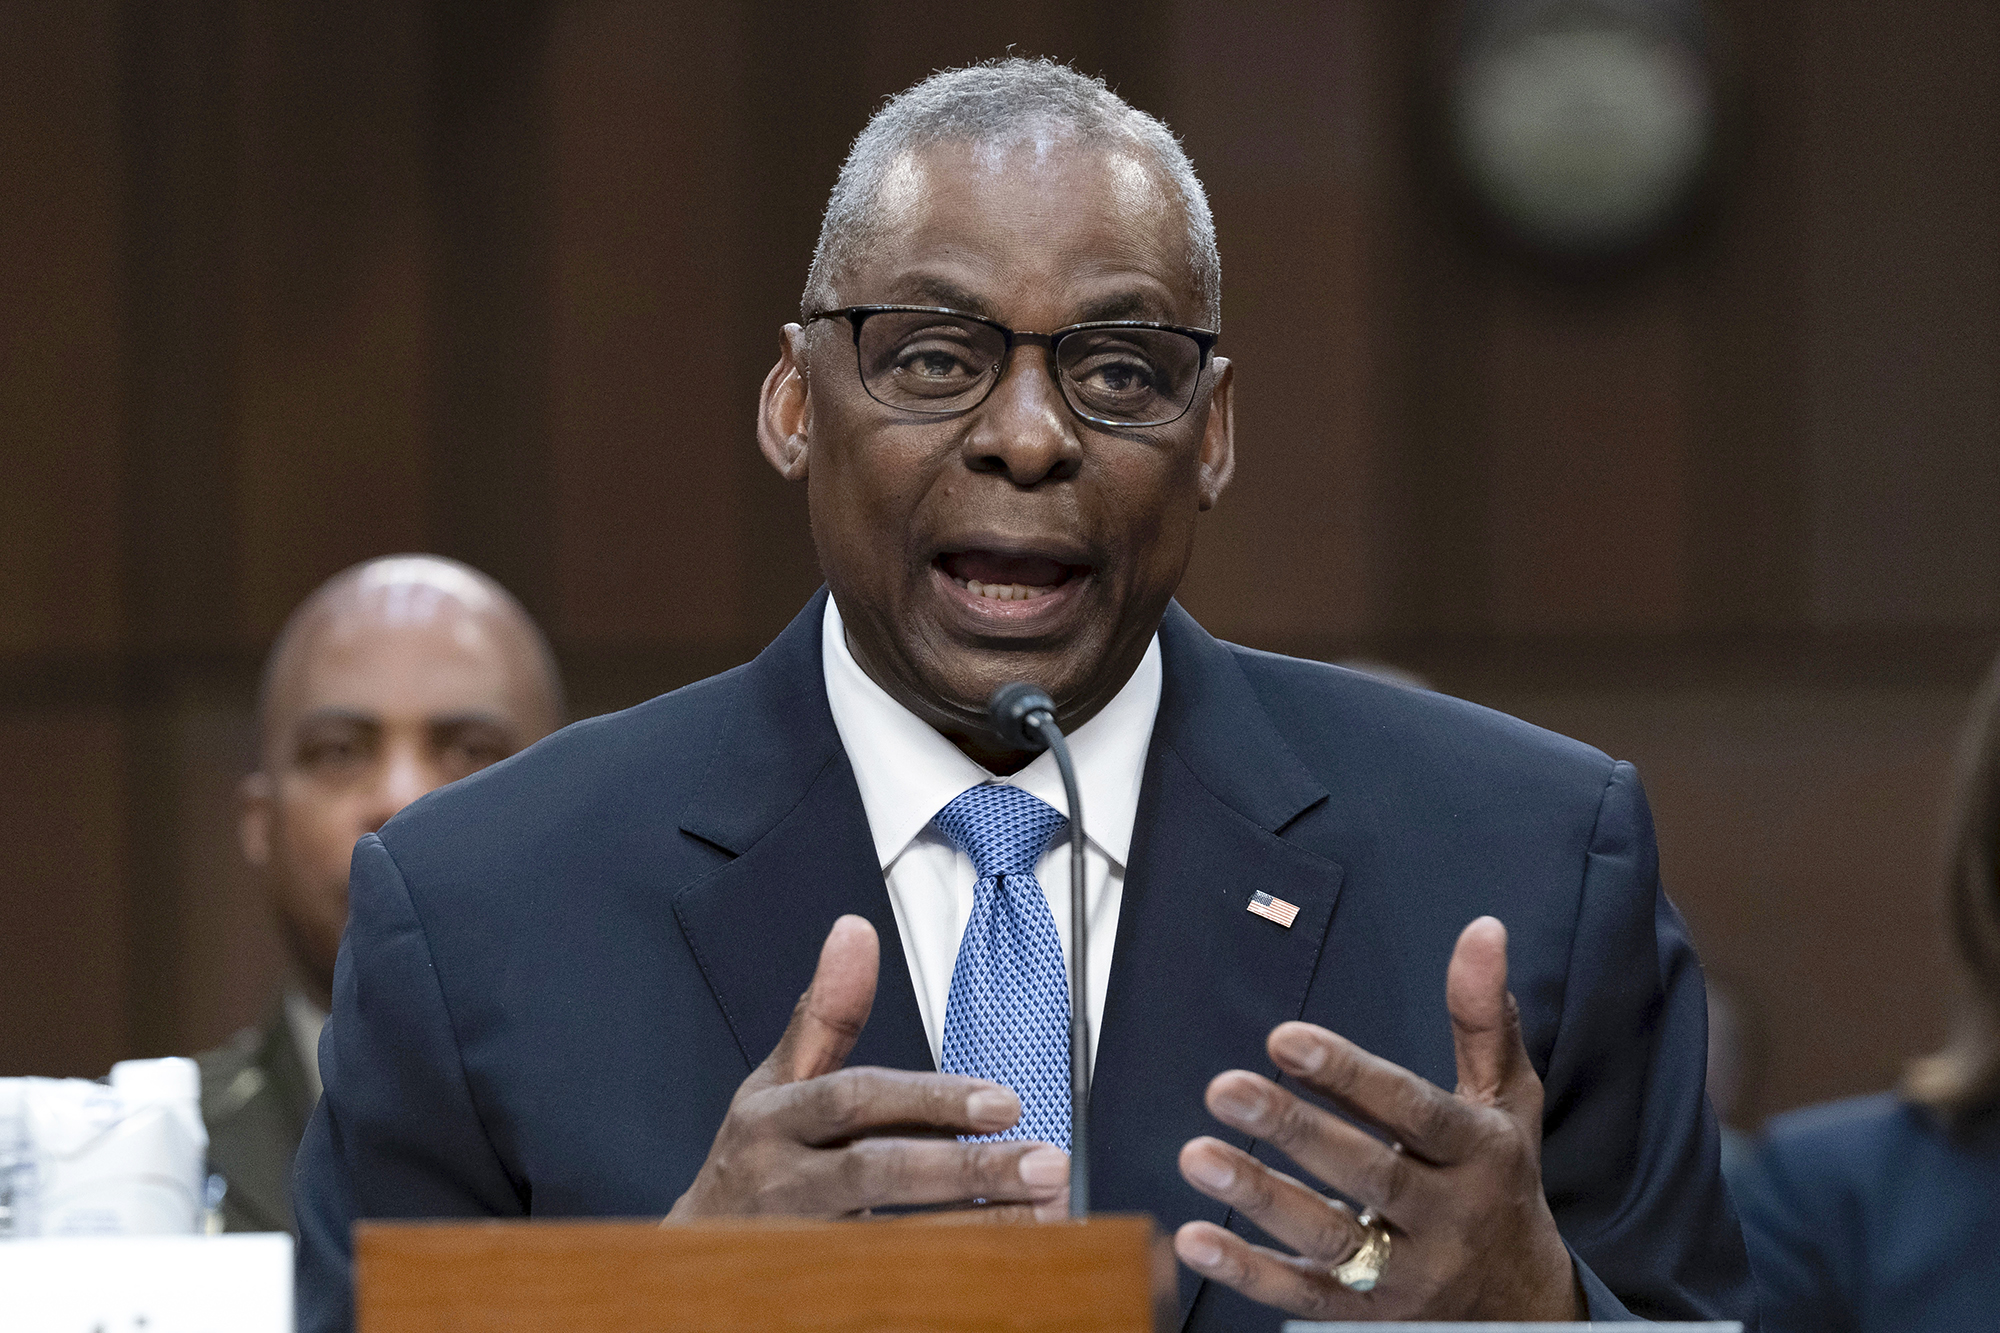 Secretary of Defense Lloyd Austin testifies before Senate Committee on Armed Services during a hearing at Capitol Hill in Washington D.C., on April 9.